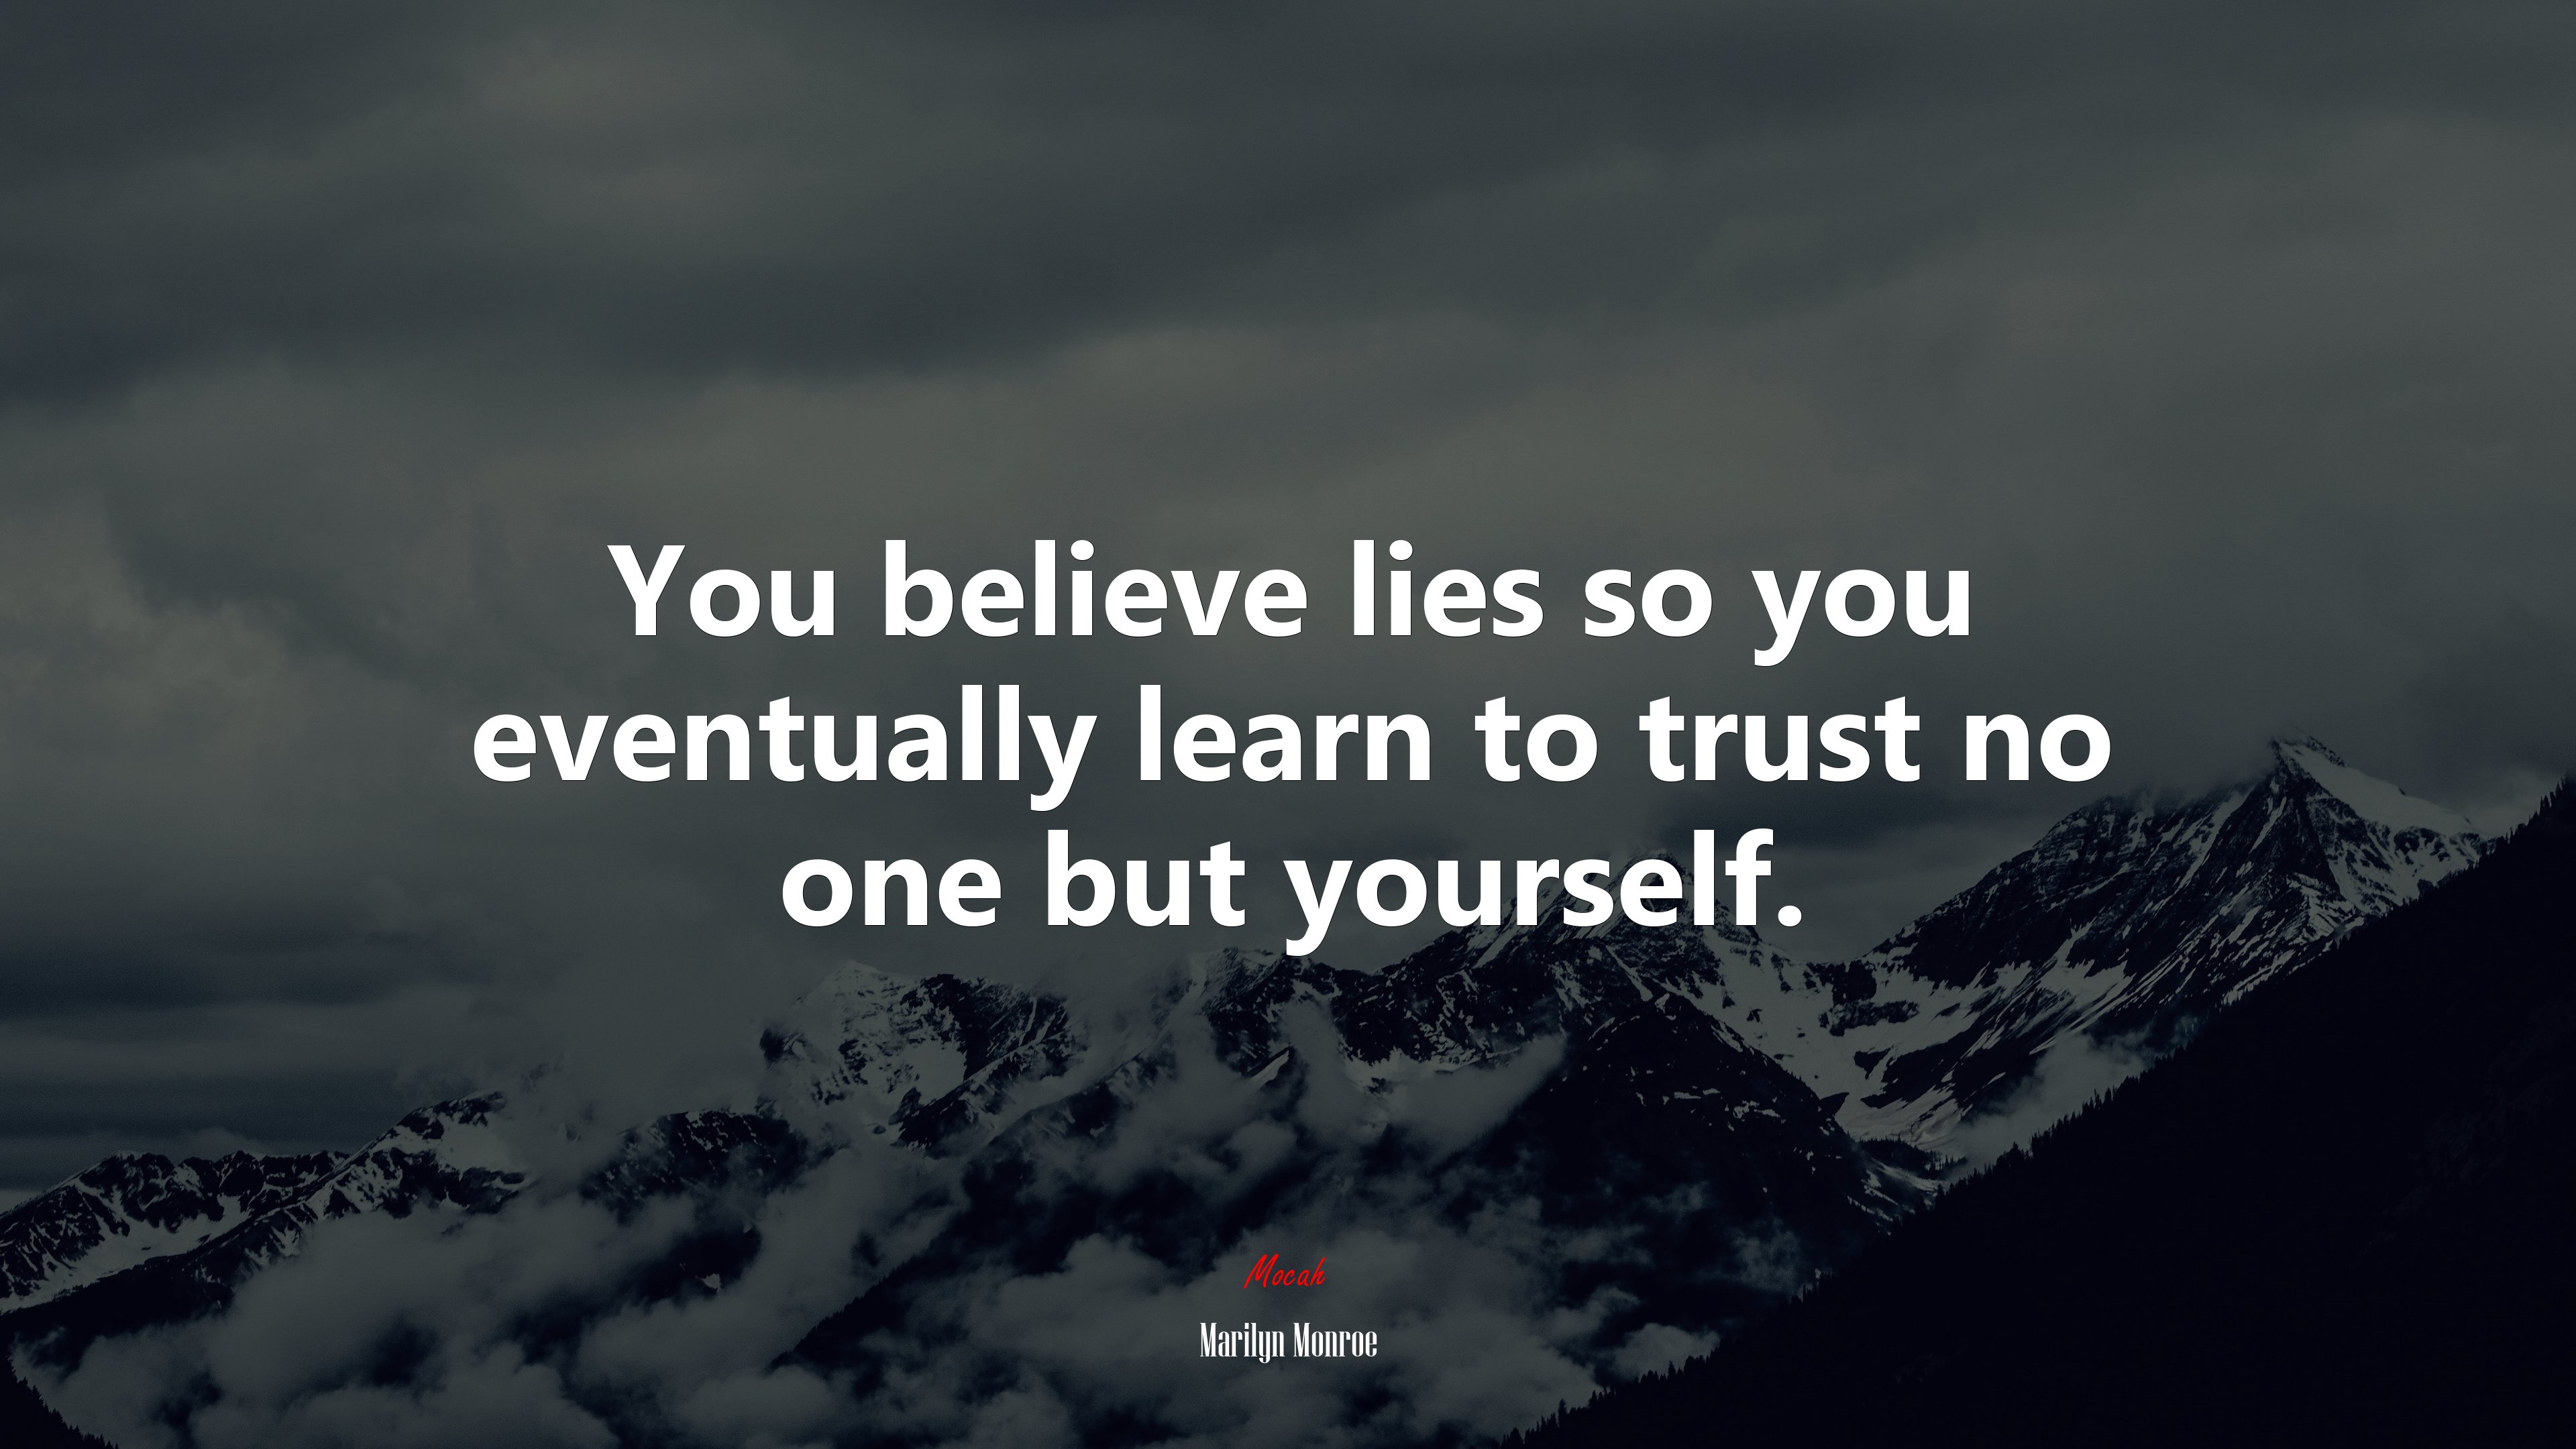 You believe lies so you eventually learn to trust no one but yourself marilyn monroe quote